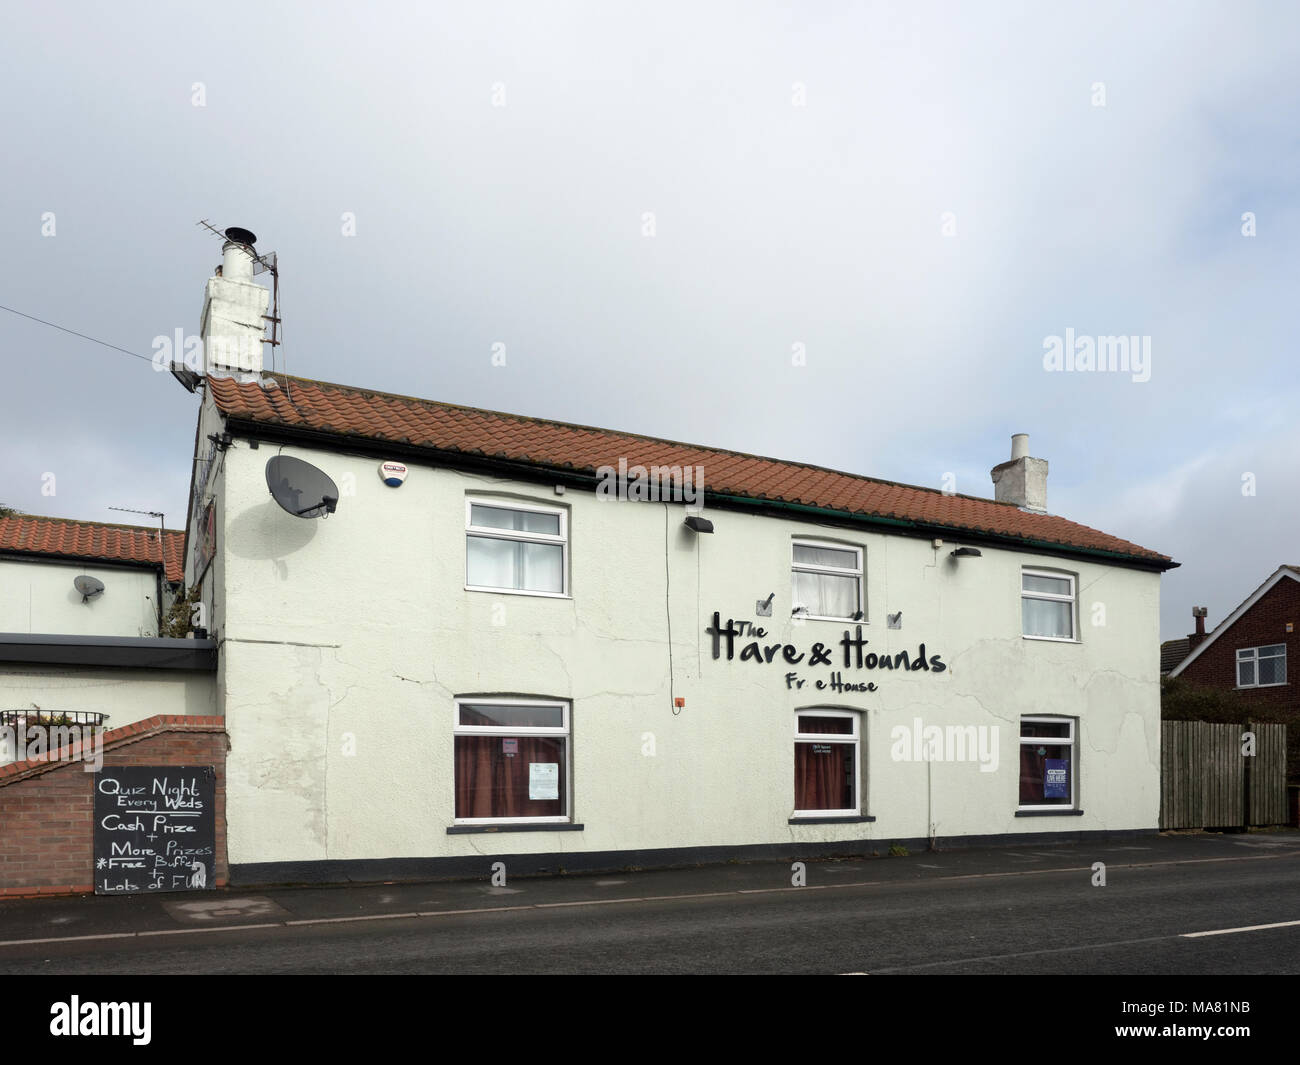 Hare e Hounds Public House, High Street, Holme on Spalding Moor, East Riding of Yorkshire, Inghilterra, Regno Unito Foto Stock